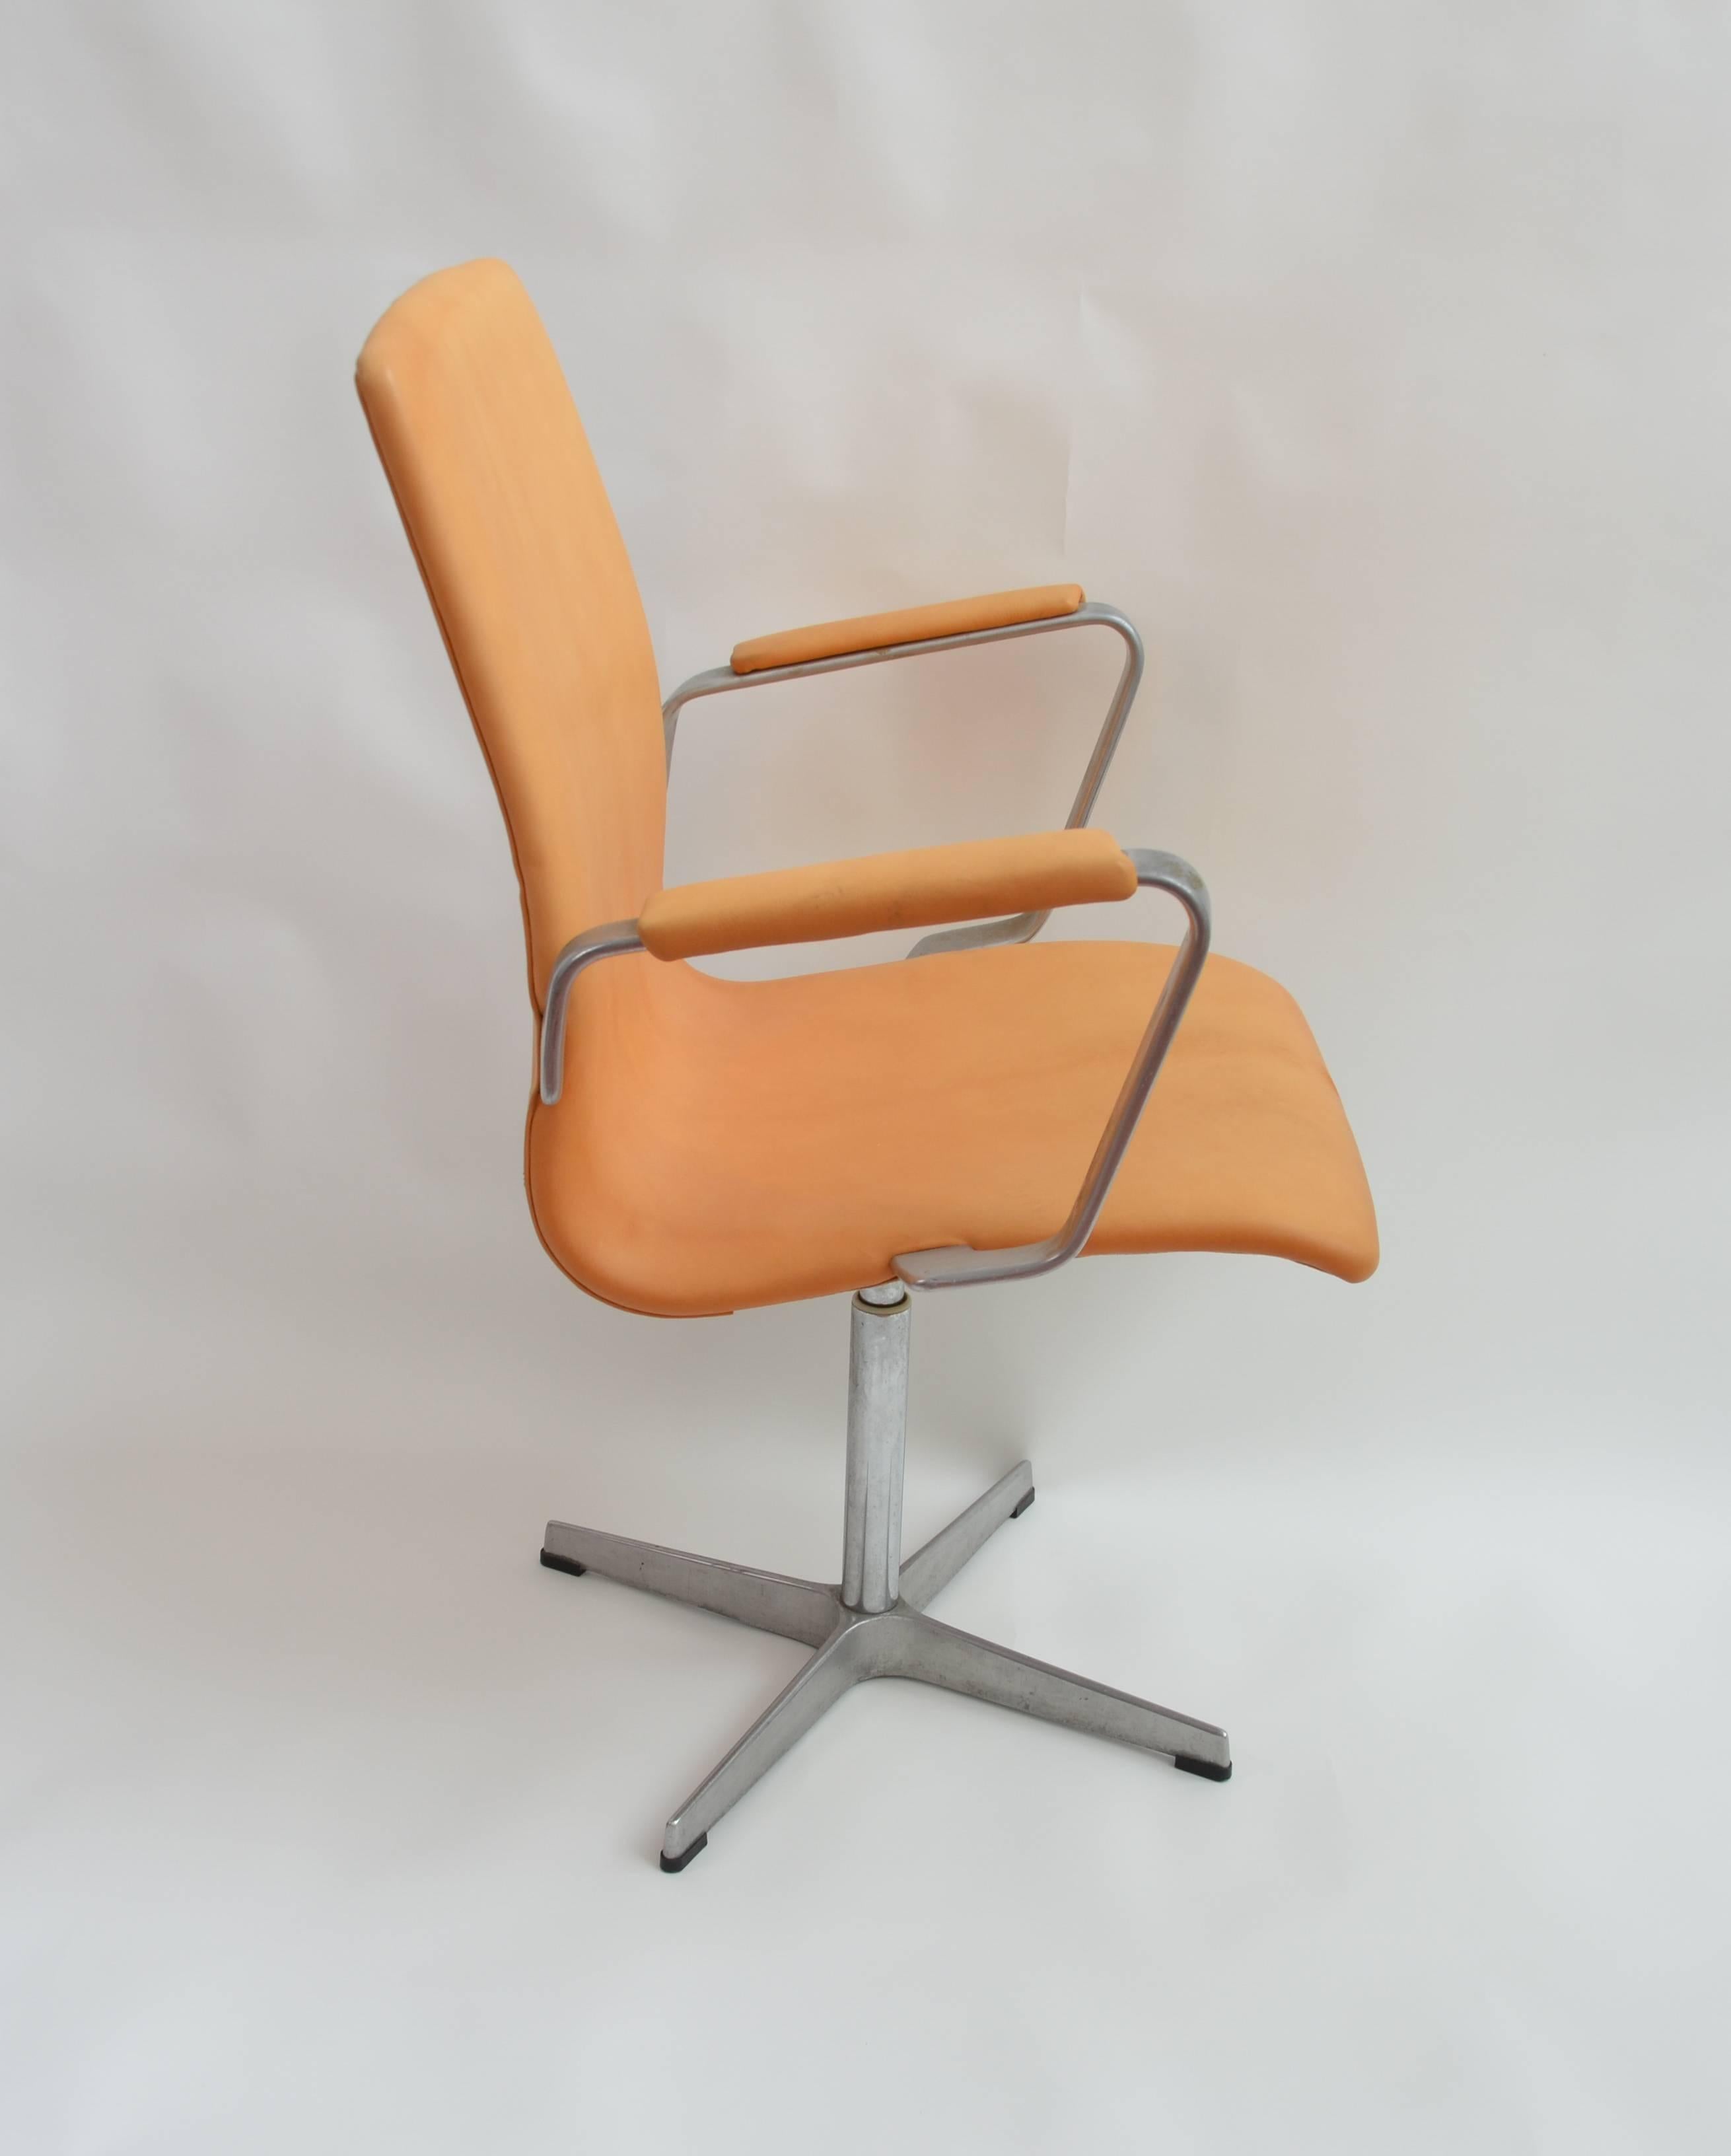 Set of six Oxford desk chairs by Arne Jacobsen for Fritz Hansen.